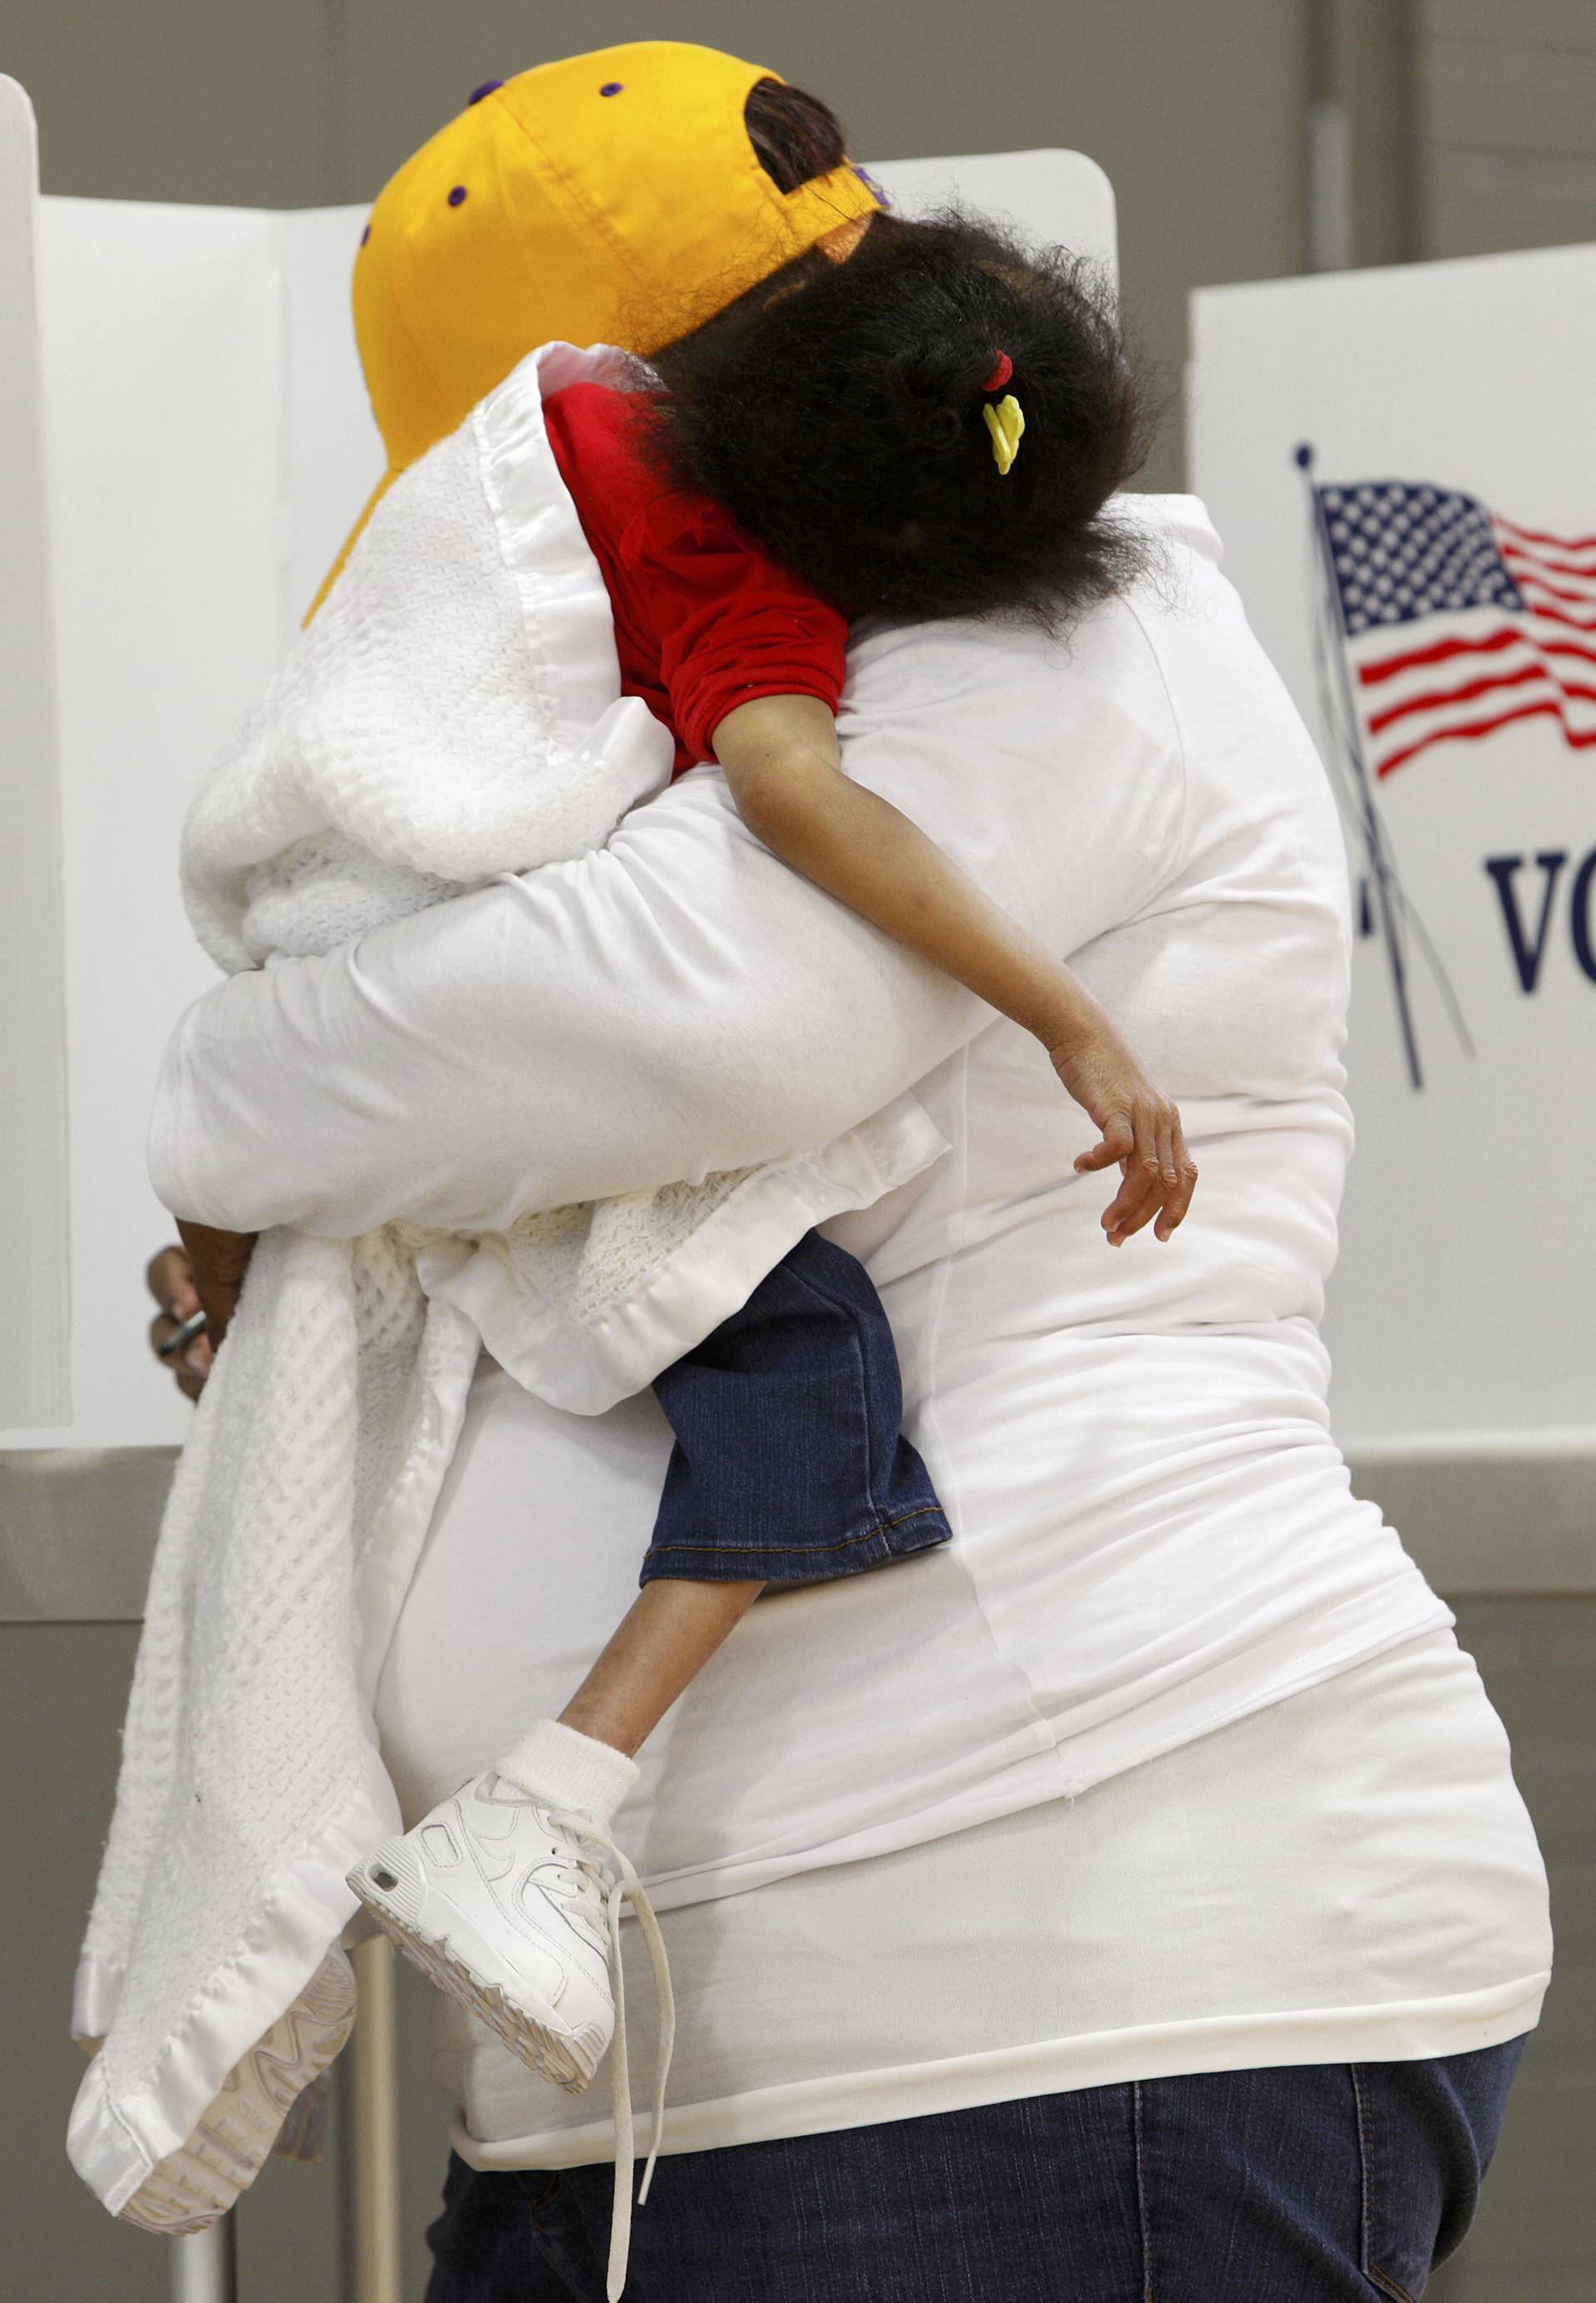 A mother carries her sleeping child while voting during the U.S. general election in Greenville, North Carolina